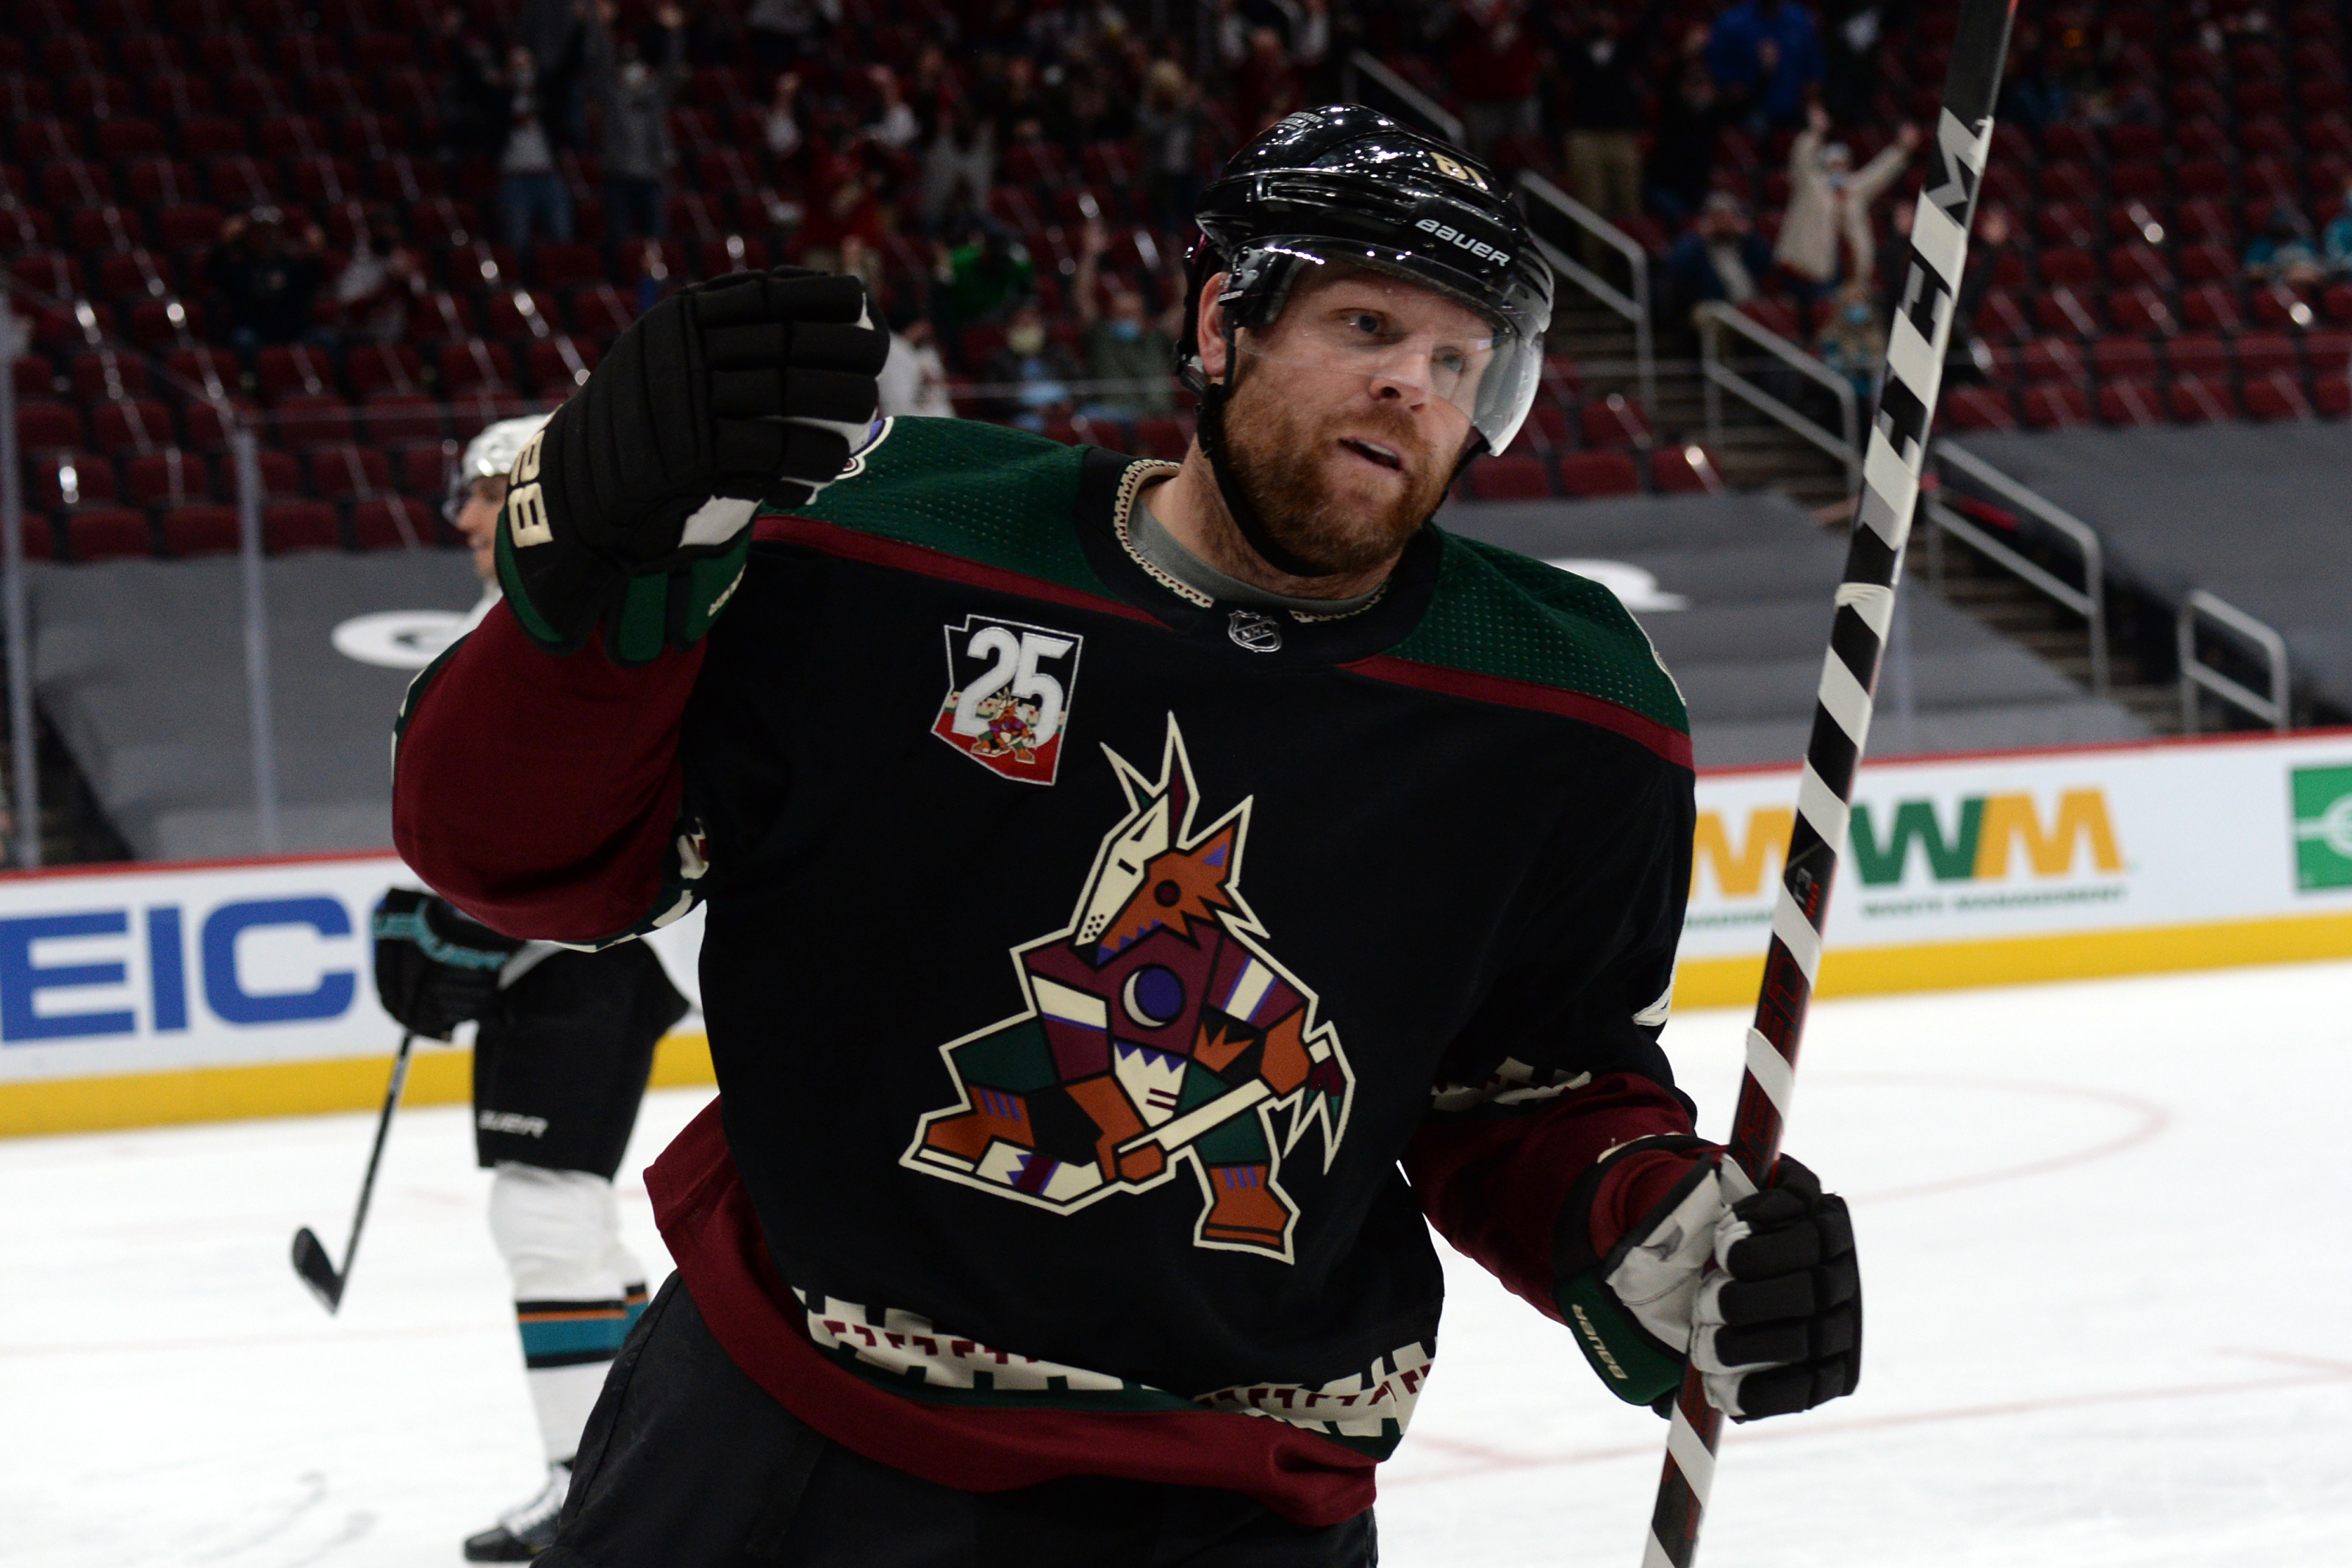 Coyotes to wear Kachina jerseys for home games upon return to play